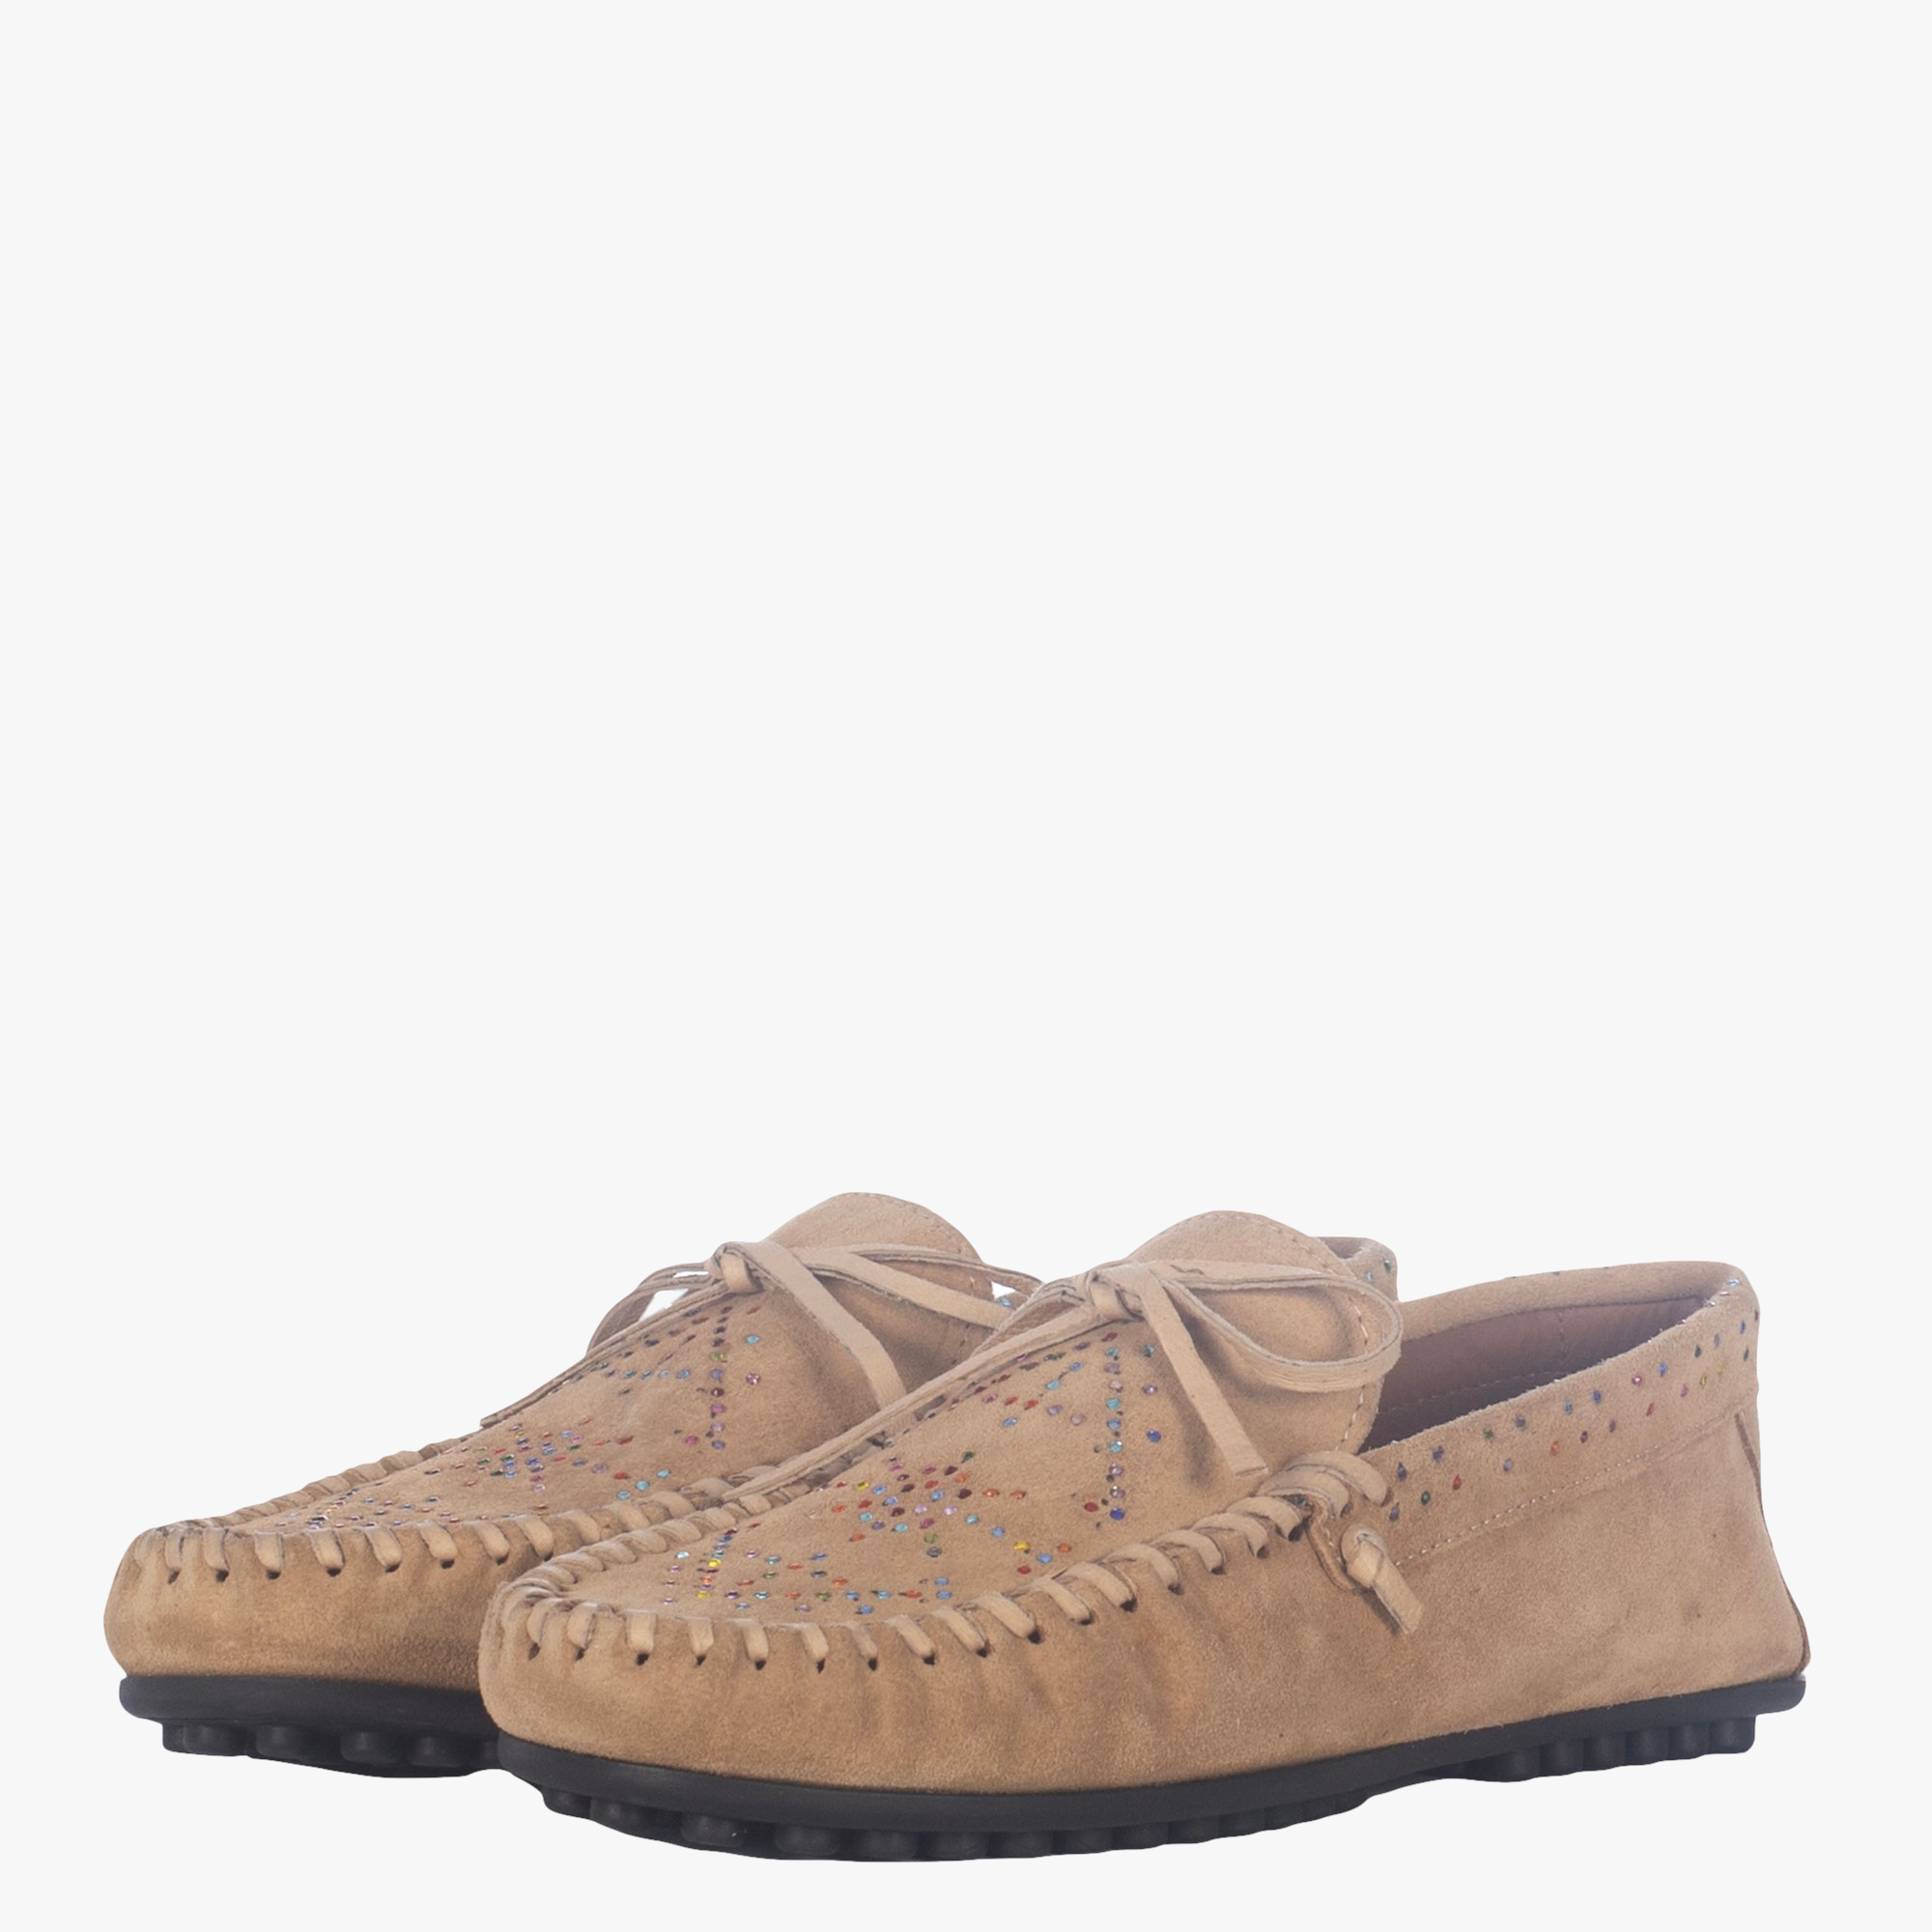 Buy Quechua Sand Loafers Multicolored Strass by Toral Shoes | Seezona